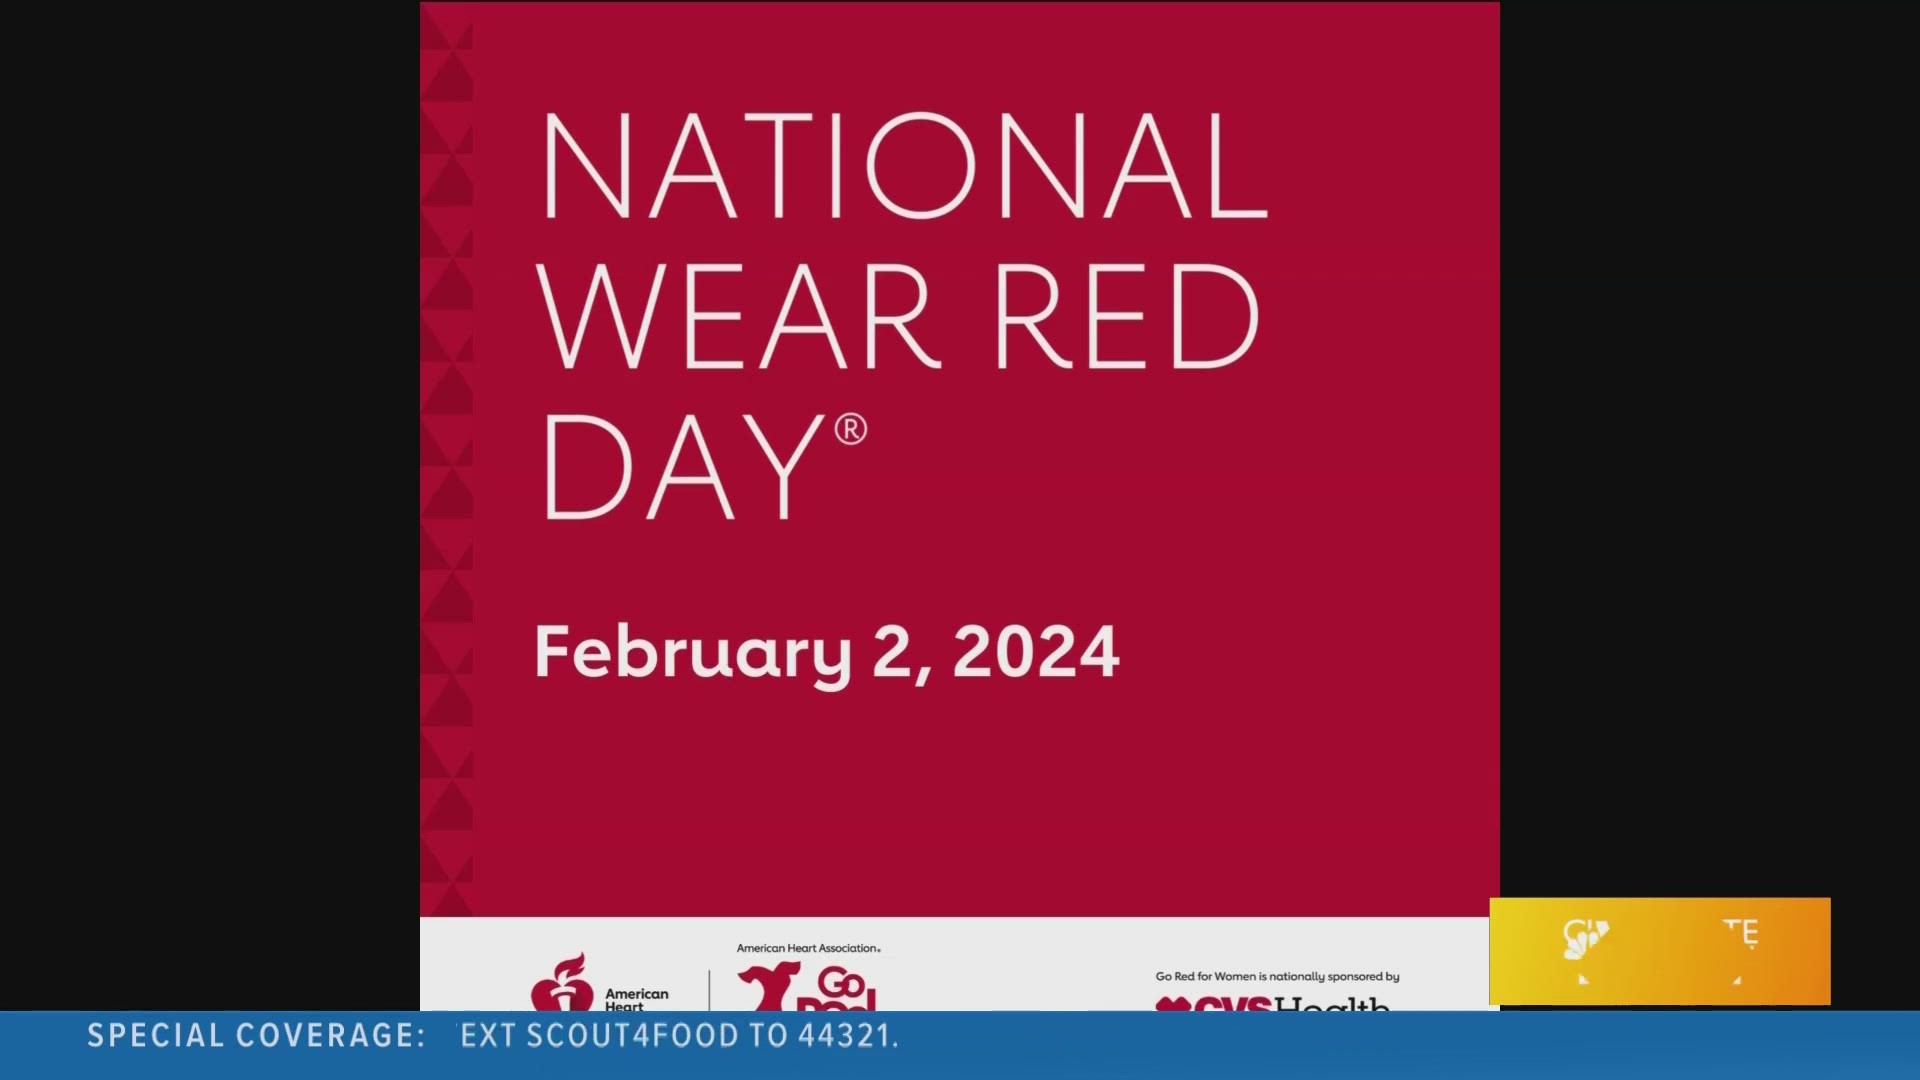 Today is designed to raise awareness for women's heart health